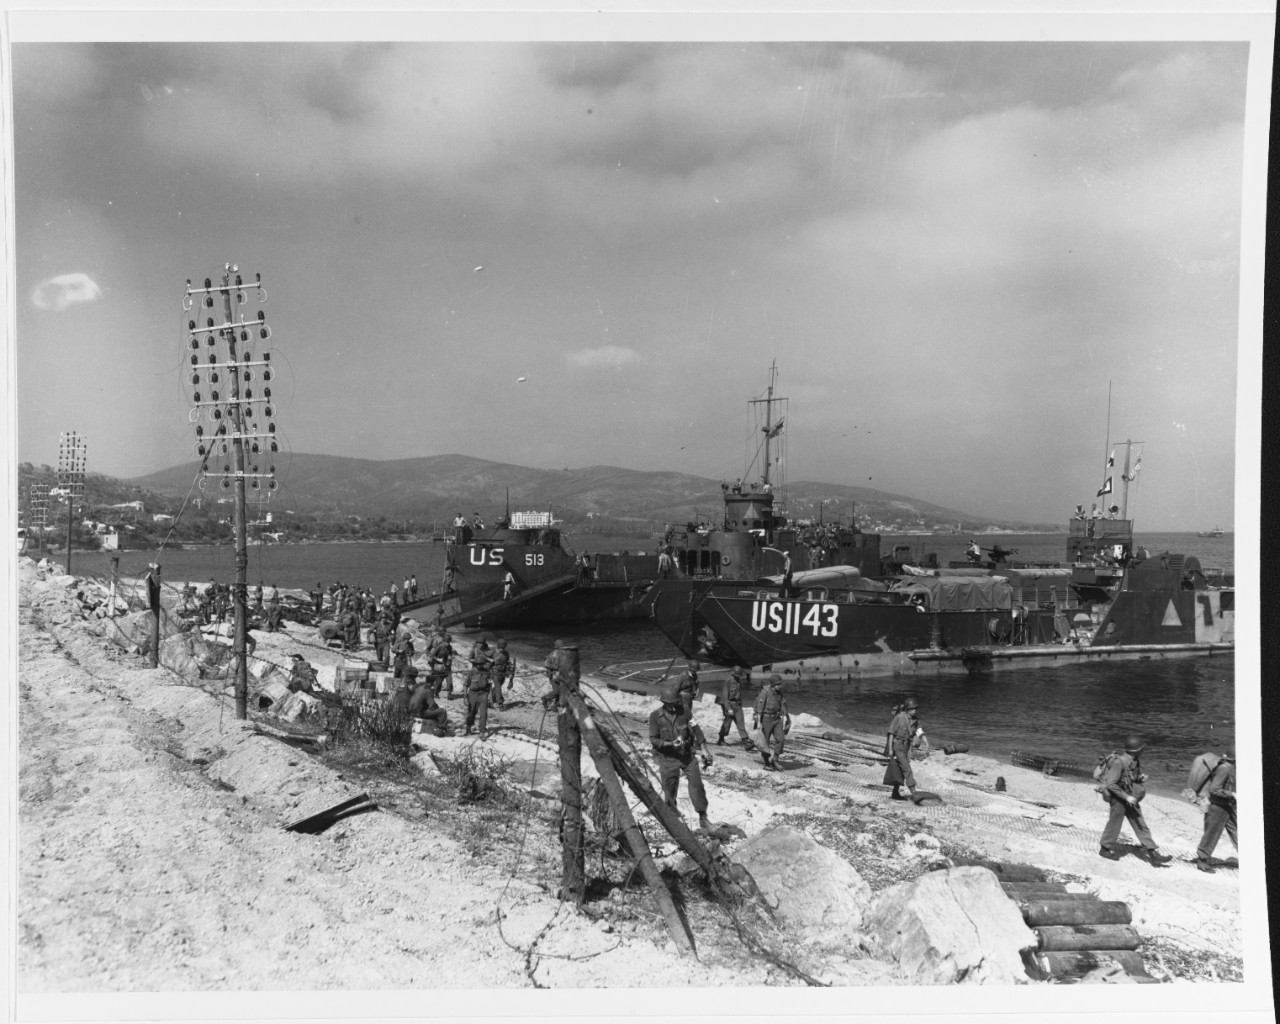 Southern France Invasion, August 1944. USS LCI-513 and LCT-1143 unloading on a Southern France beach, on "D-Day"